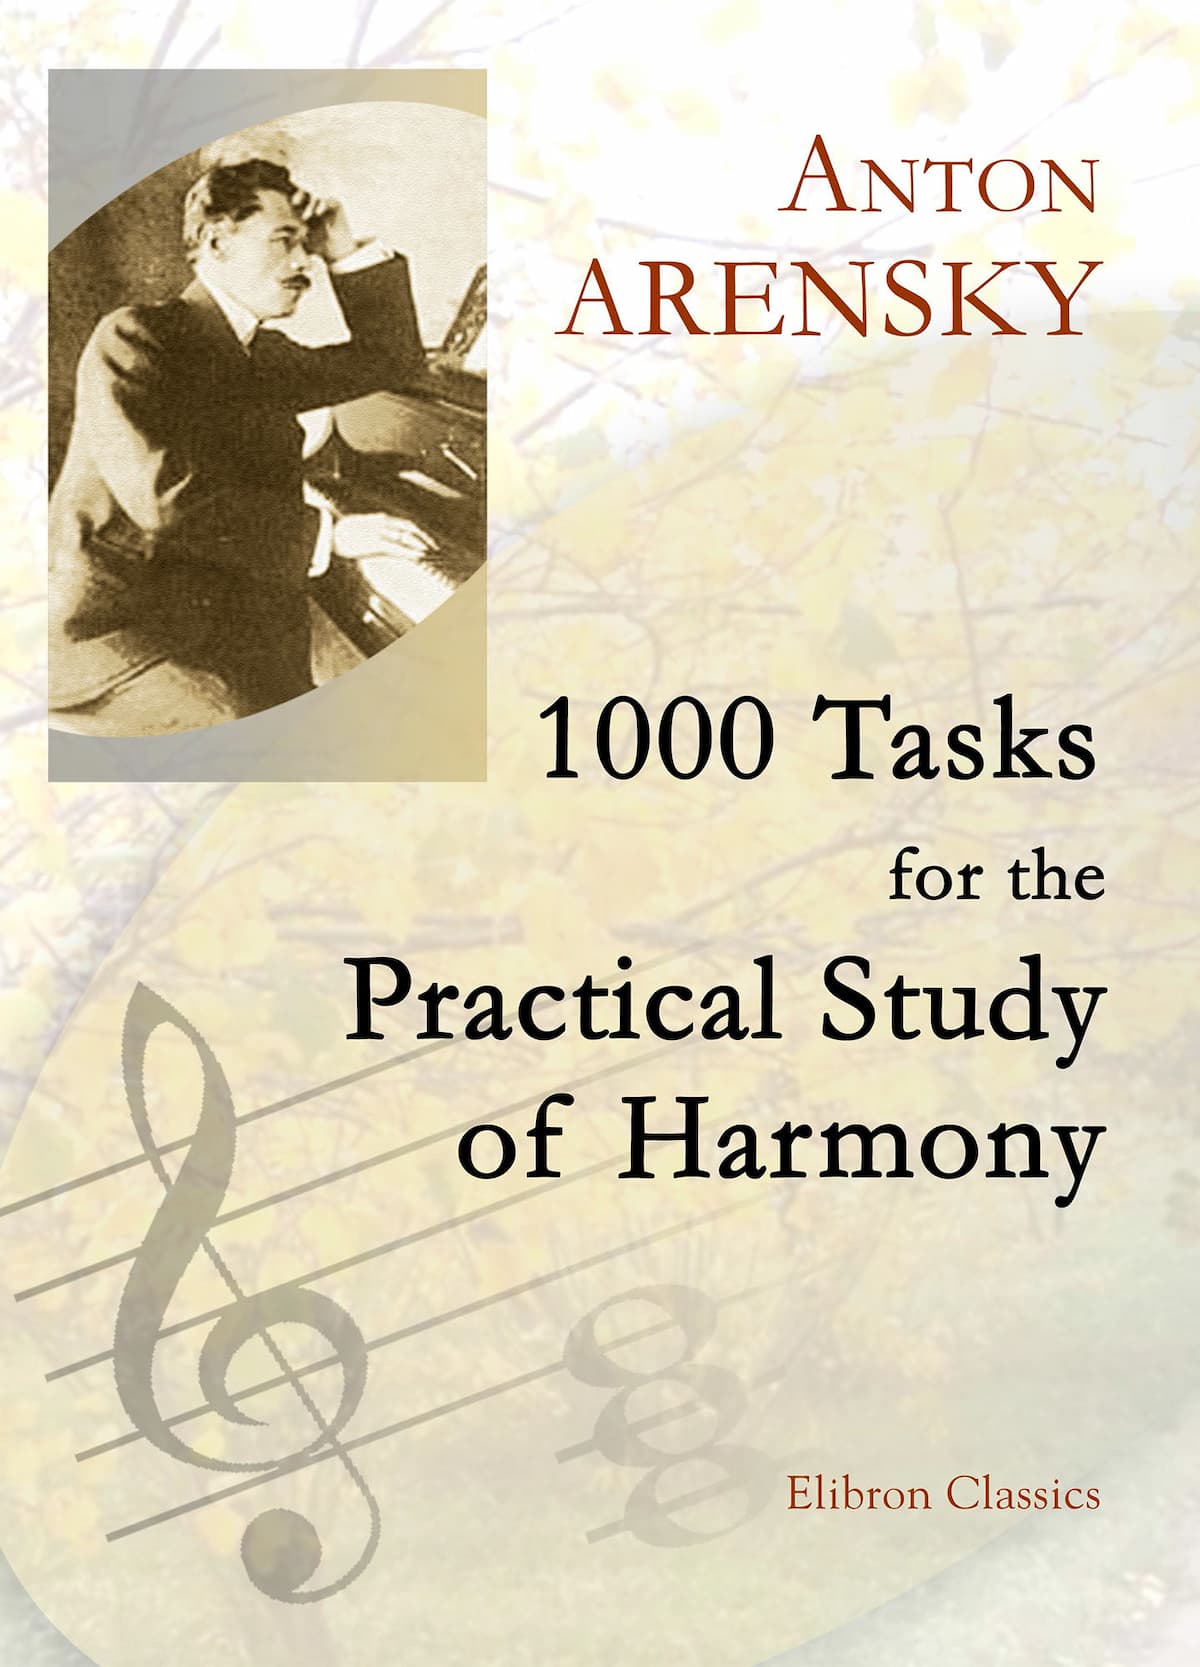 Anton Arensky's 1000 Tasks for the Practical Study of Harmony book cover